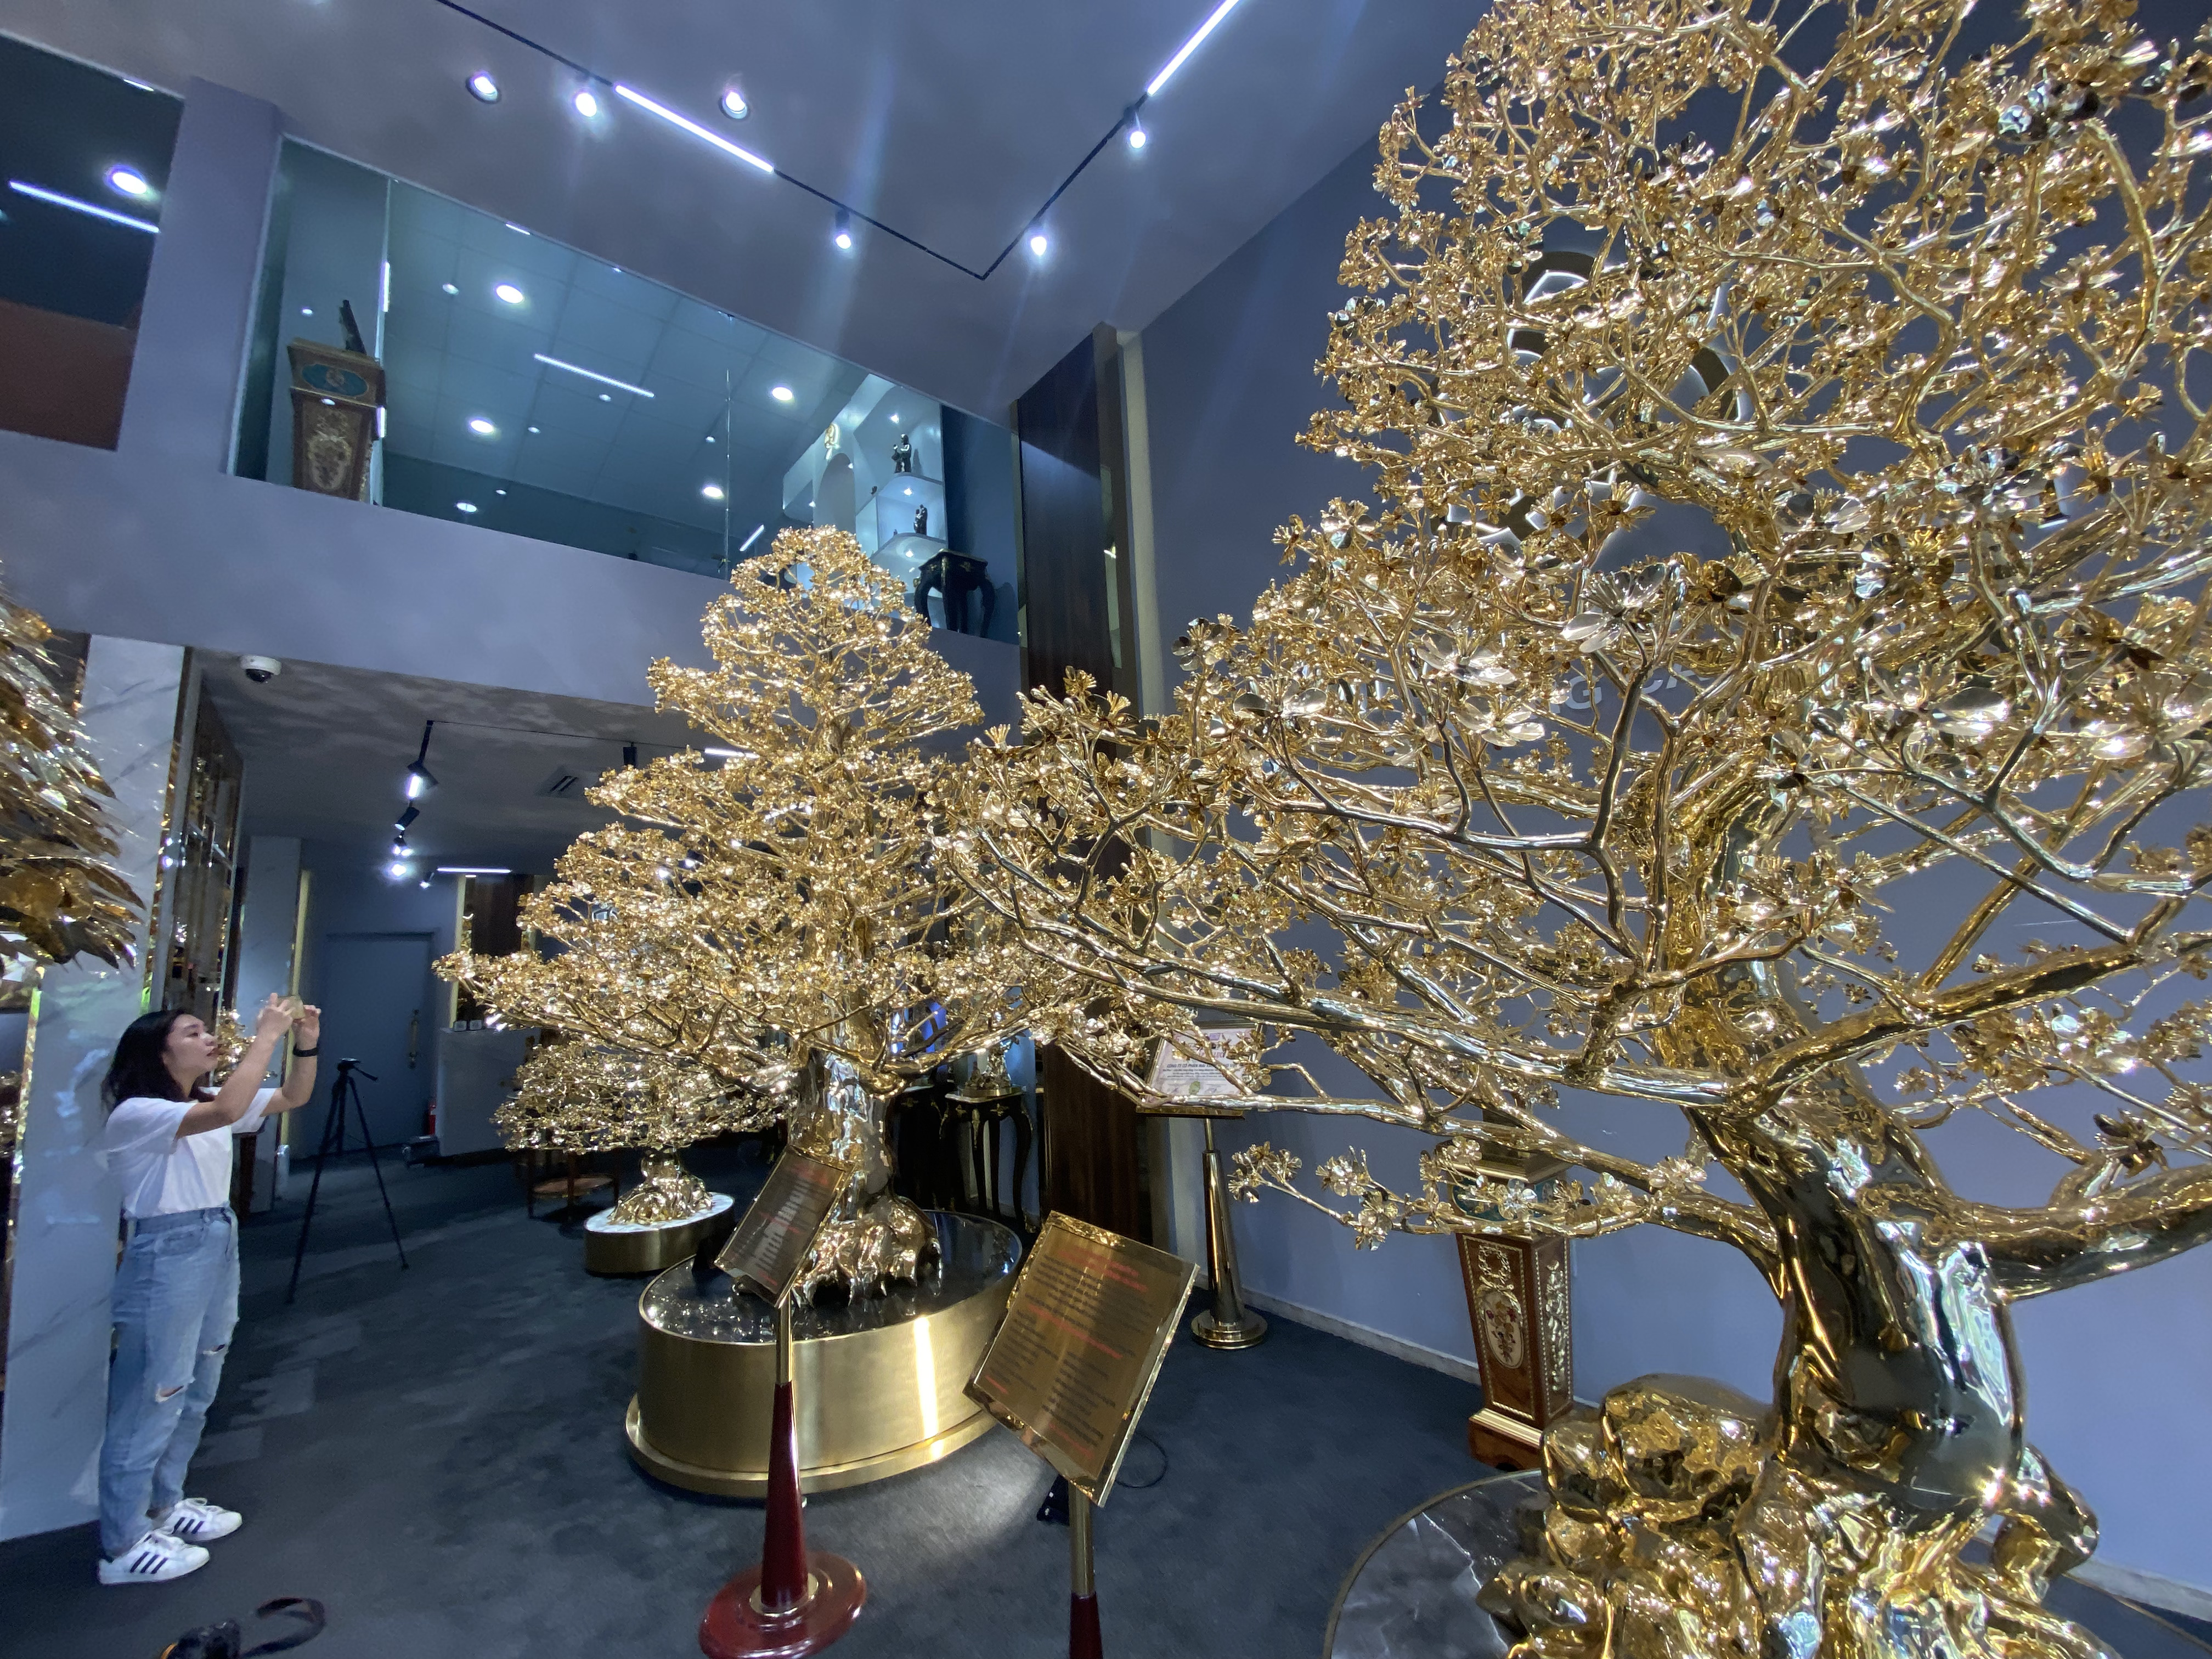 Two huge gold-plated apricot blossom trees on display at the Mai Vang Rong Viet headquarters at 45 Nguyen Huu Canh Street in Binh Thanh District, Ho Chi Minh City. Photo: Ngoc Phuong / Tuoi Tre News